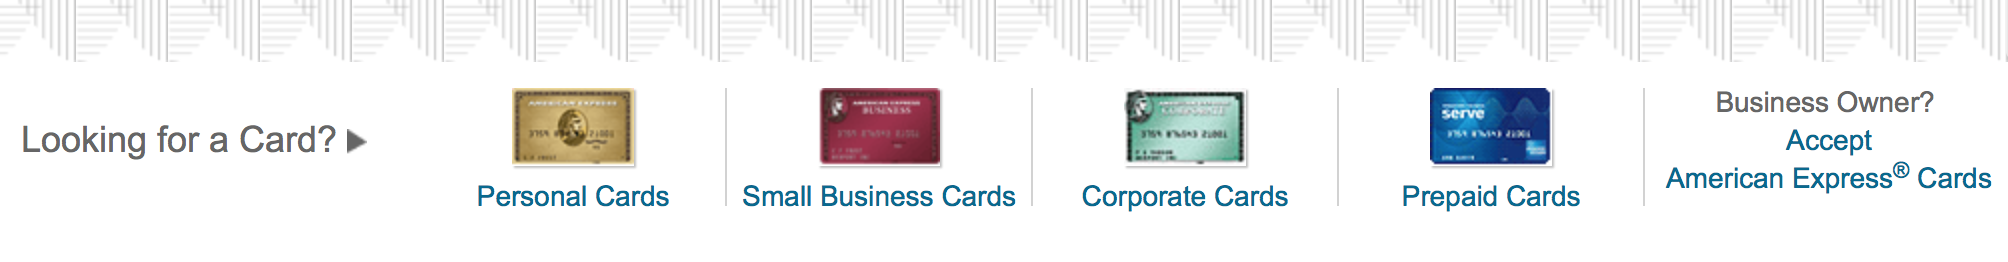 AMEX cards n different colors